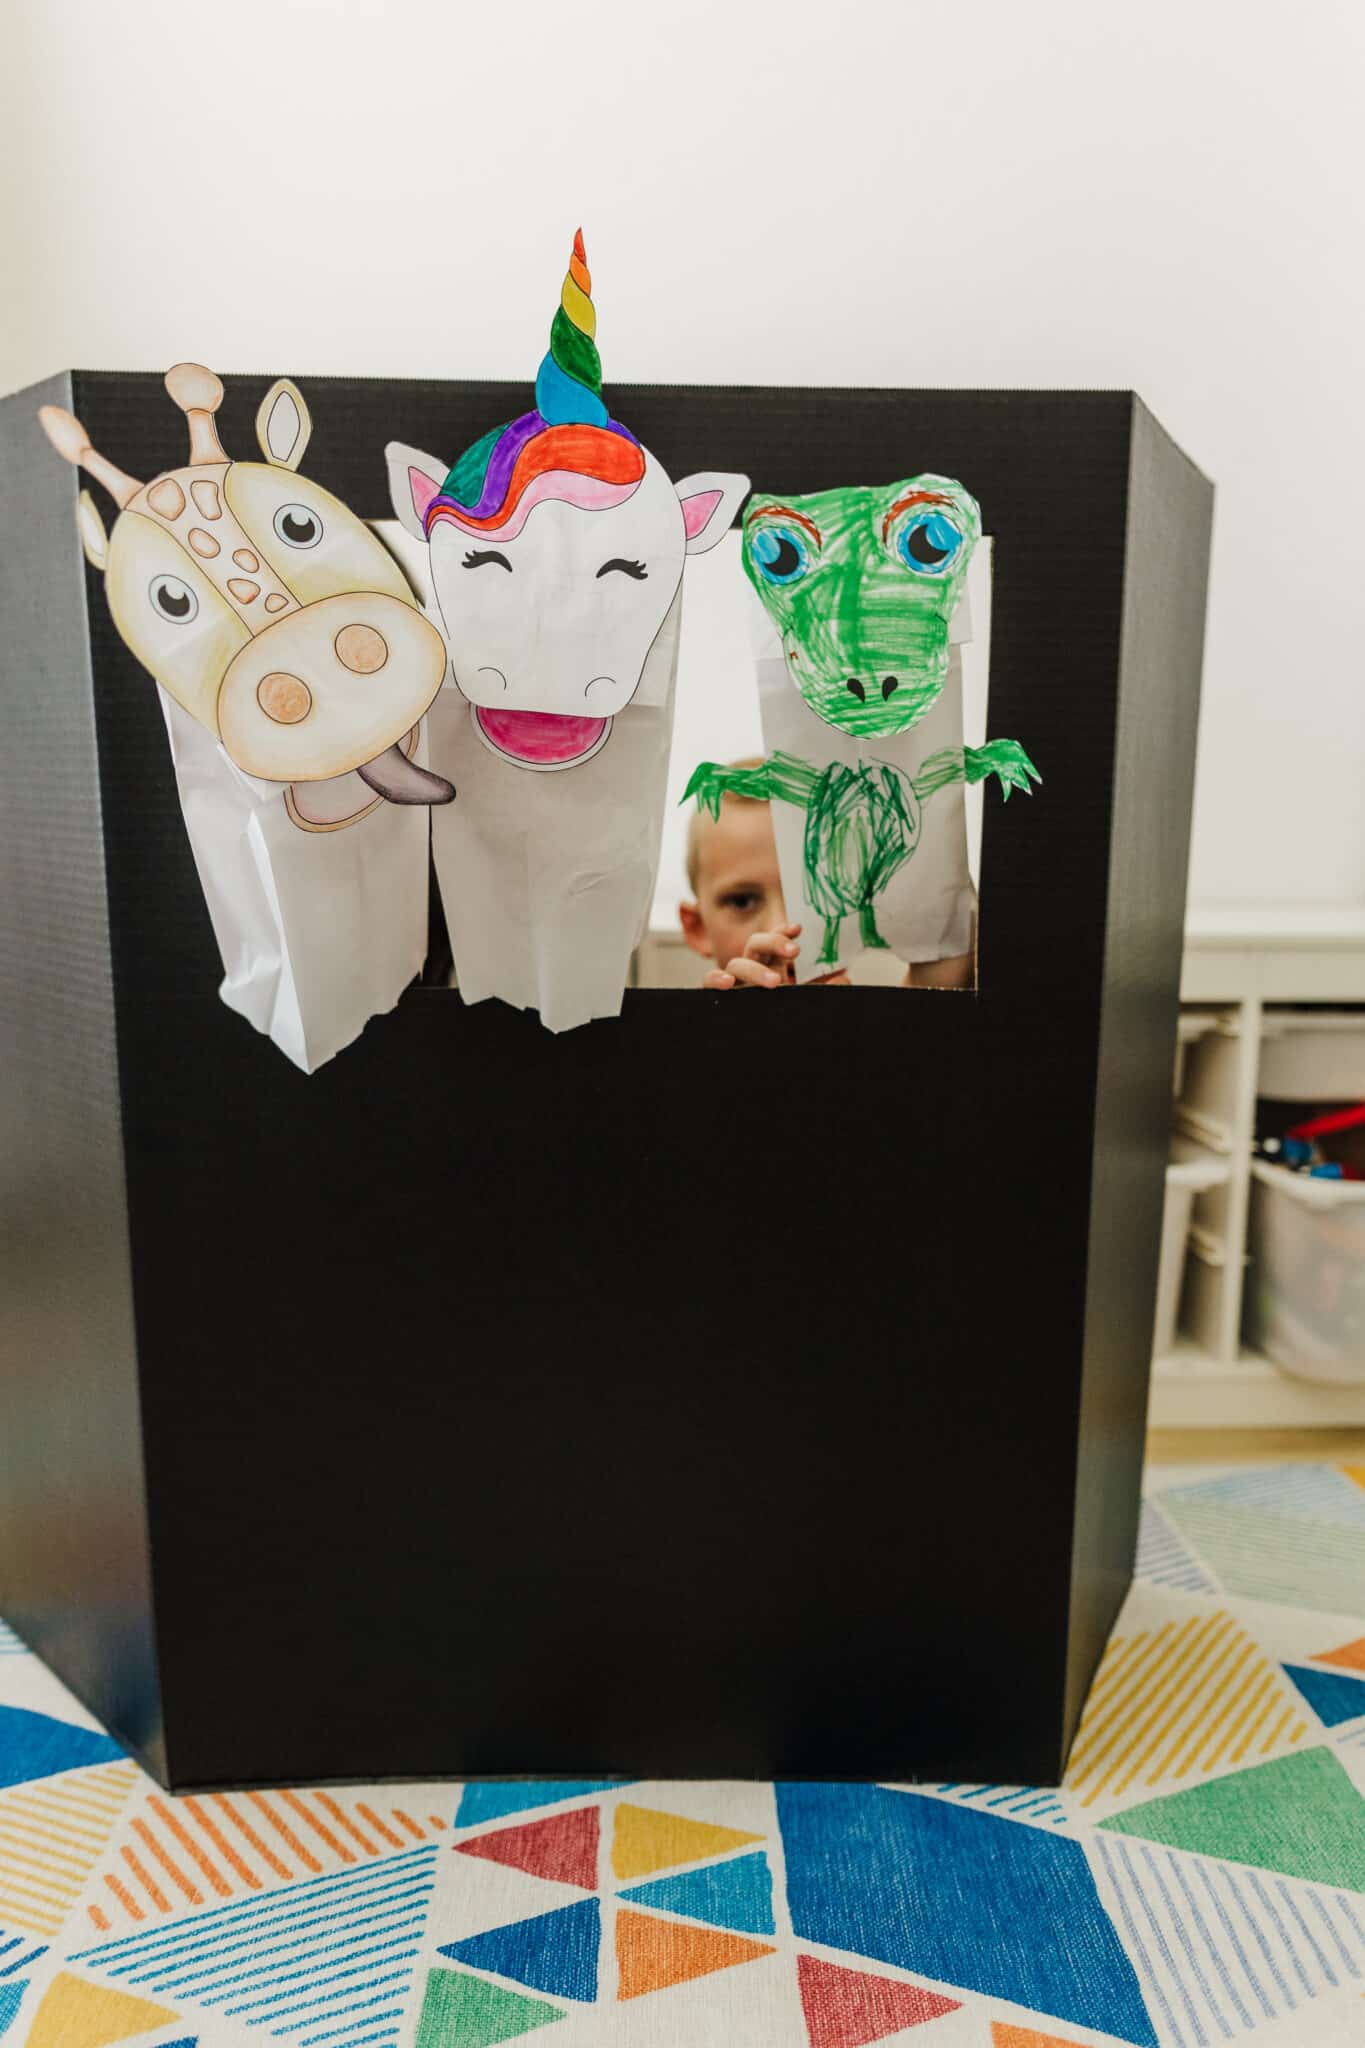 Declaration Elasticity Pharmacology Paper Bag Puppets - Friday We're In Love